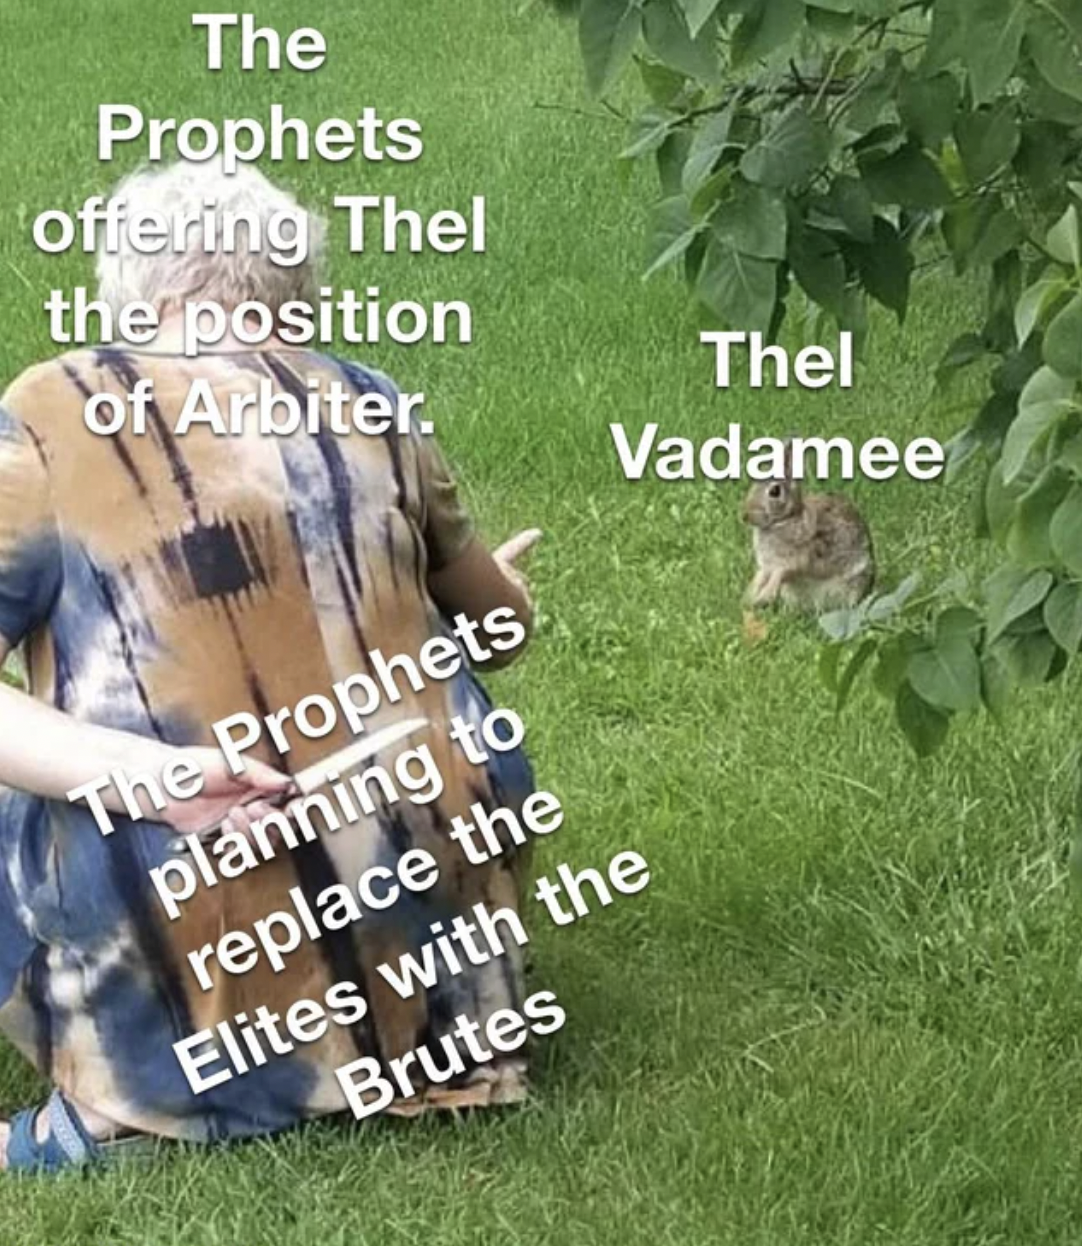 Halo Memes Co-Op - grass - The Prophets offering Thel the position of Arbiter. The Prophets planning to replace the Elites with the Brutes Thel Vadamee